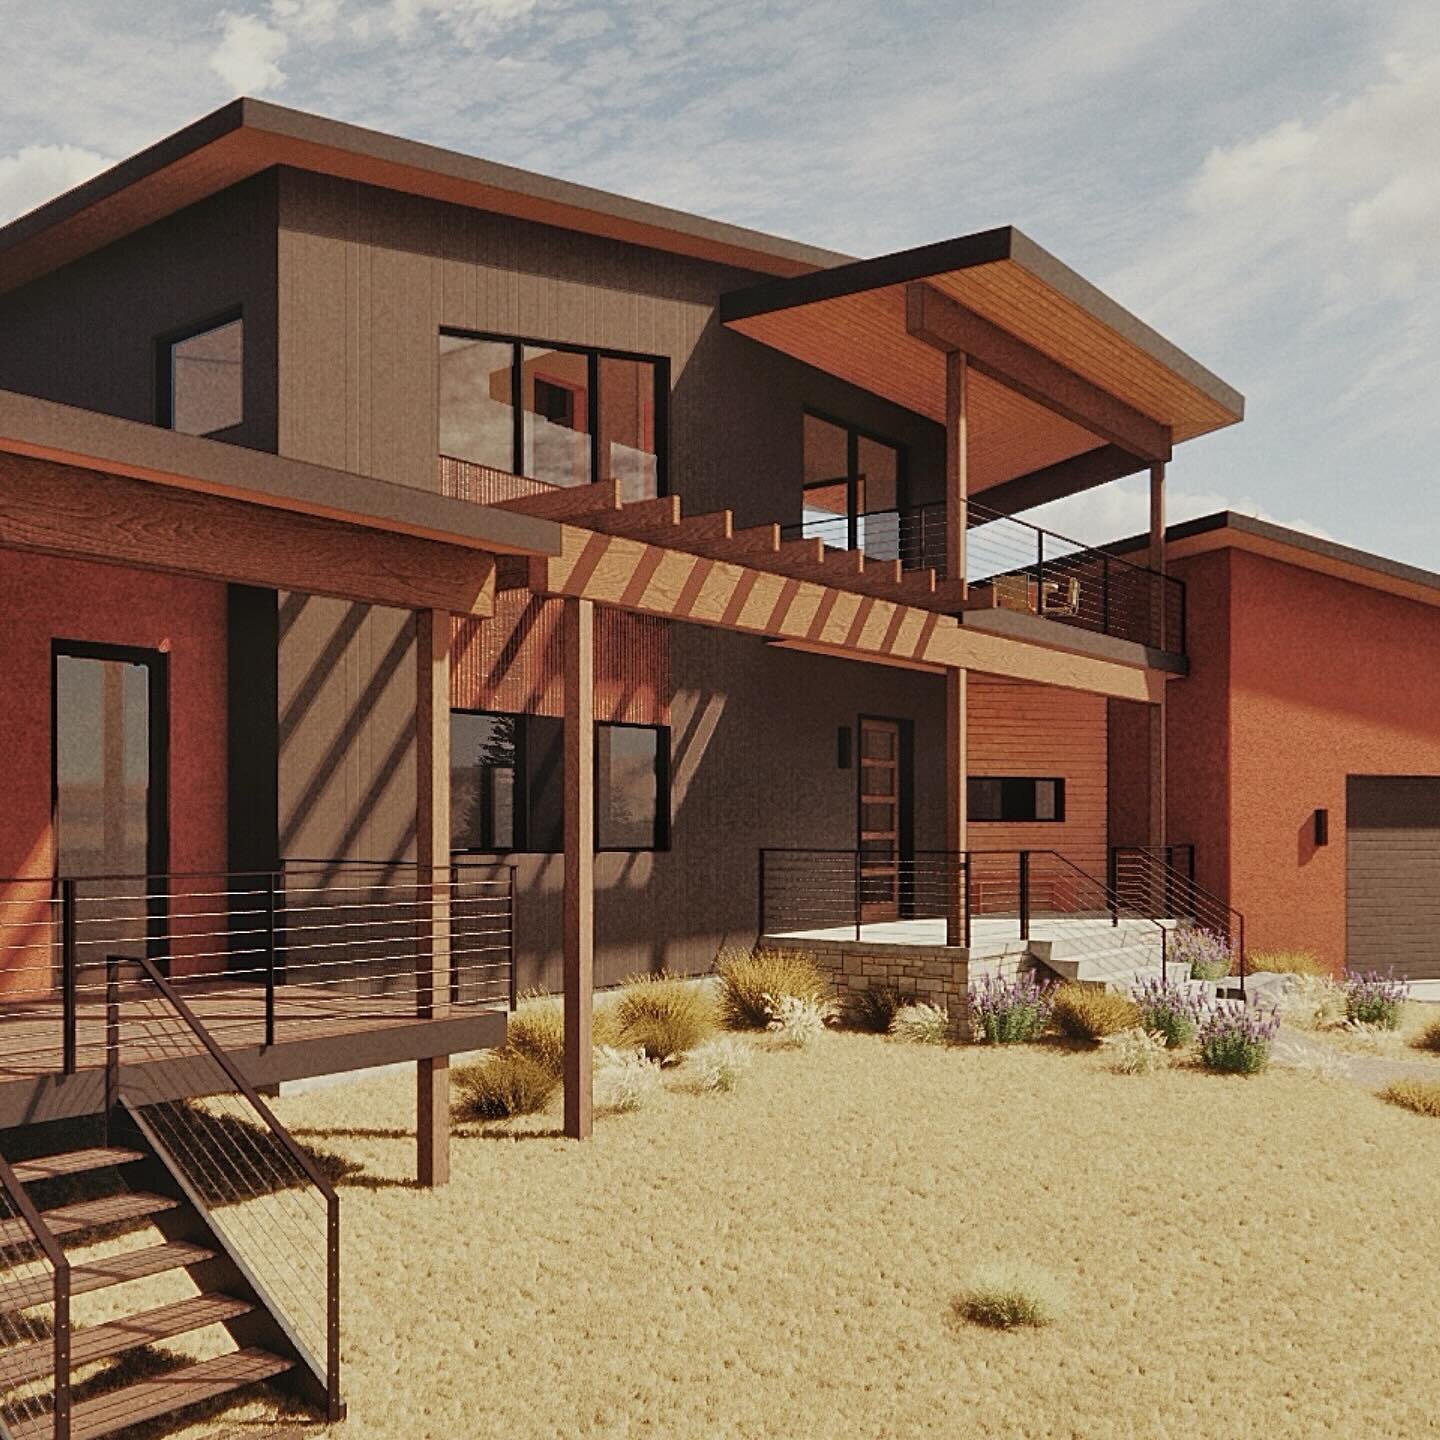 Sheep Springs officially gained approval from the Durango Ridges architectural review committee. Construction to begin in summer 2024

#thisisMESA

#mesarchitecture #durangocolorado #coloradoarchitecture #durangoarchitects